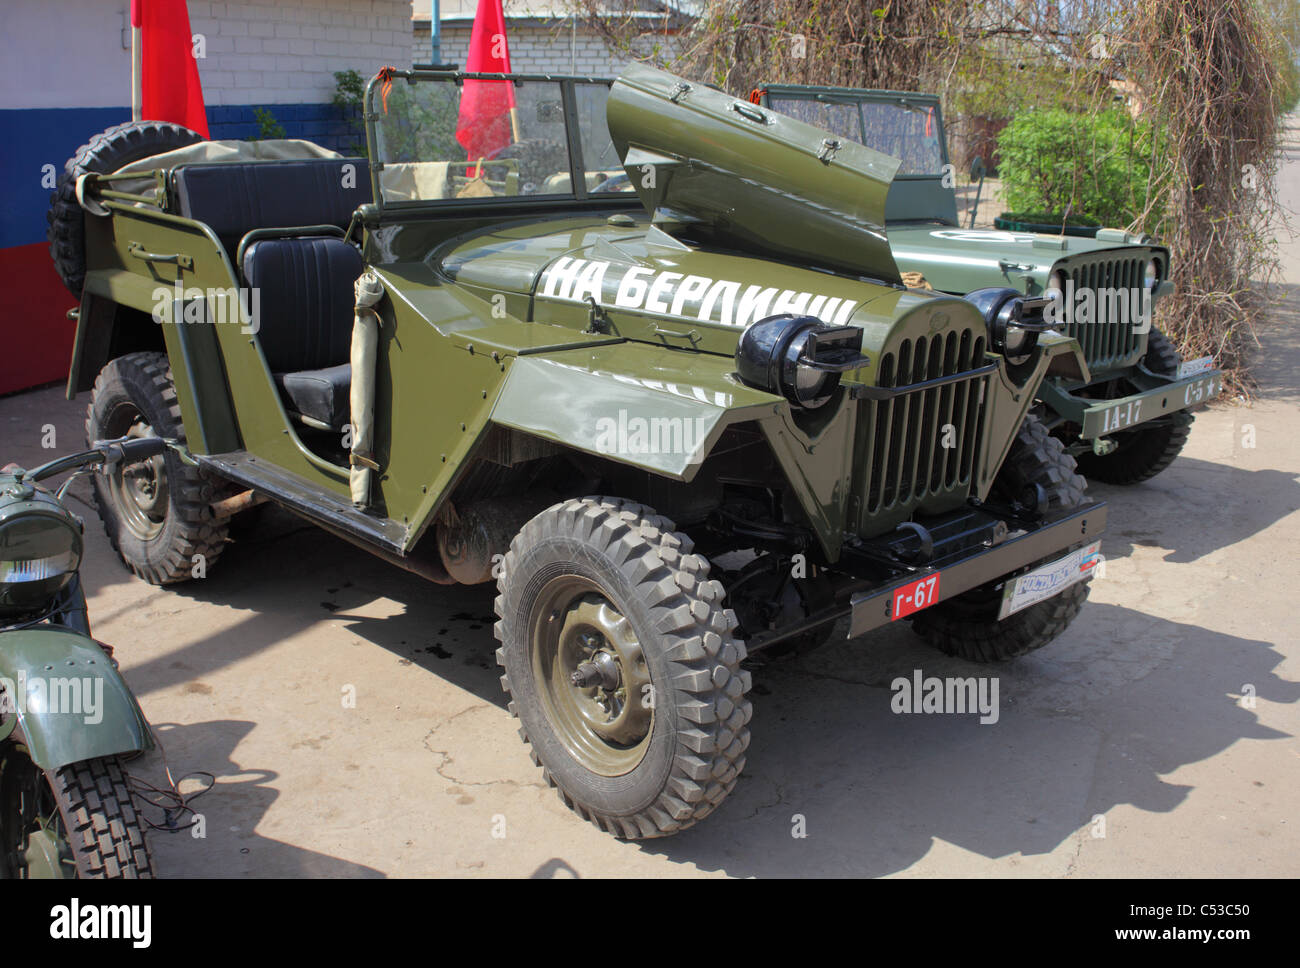 Vintage WWII army jeep in Russia Stock Photo